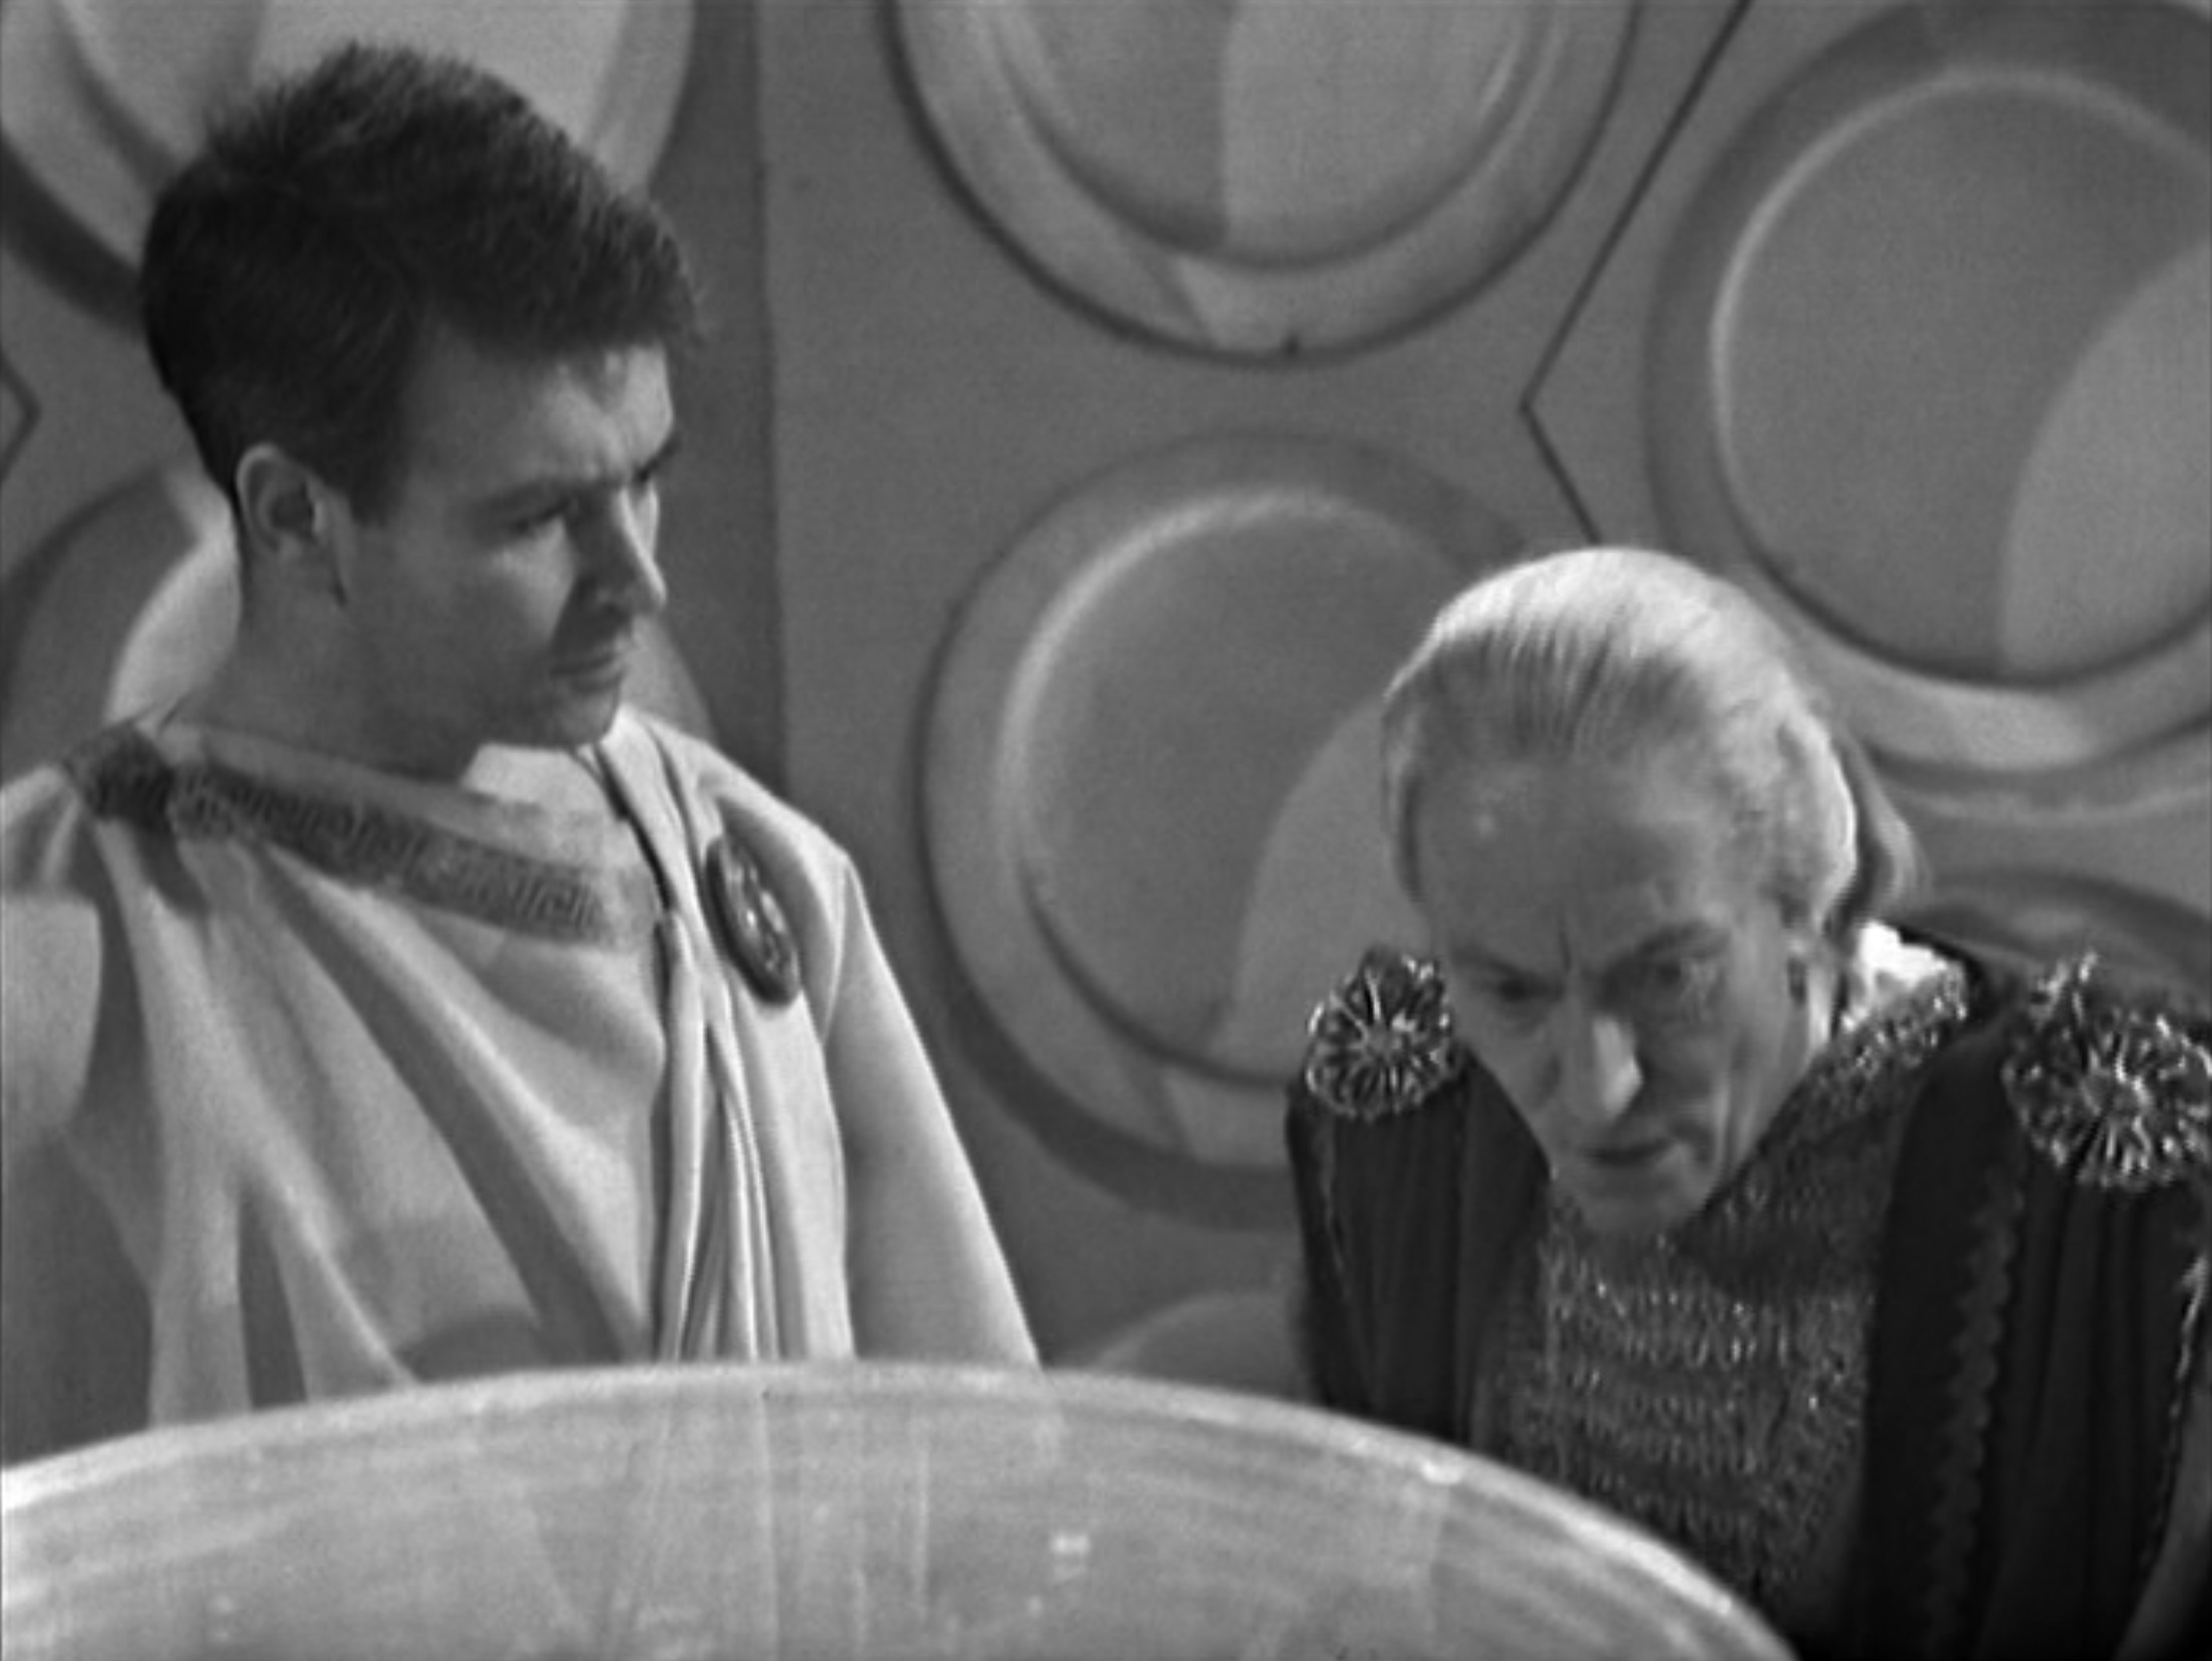 The Doctor explaining his worries after a brief materialisation to Ian. (TV: The Romans [+]Loading...["The Romans (TV story)"])